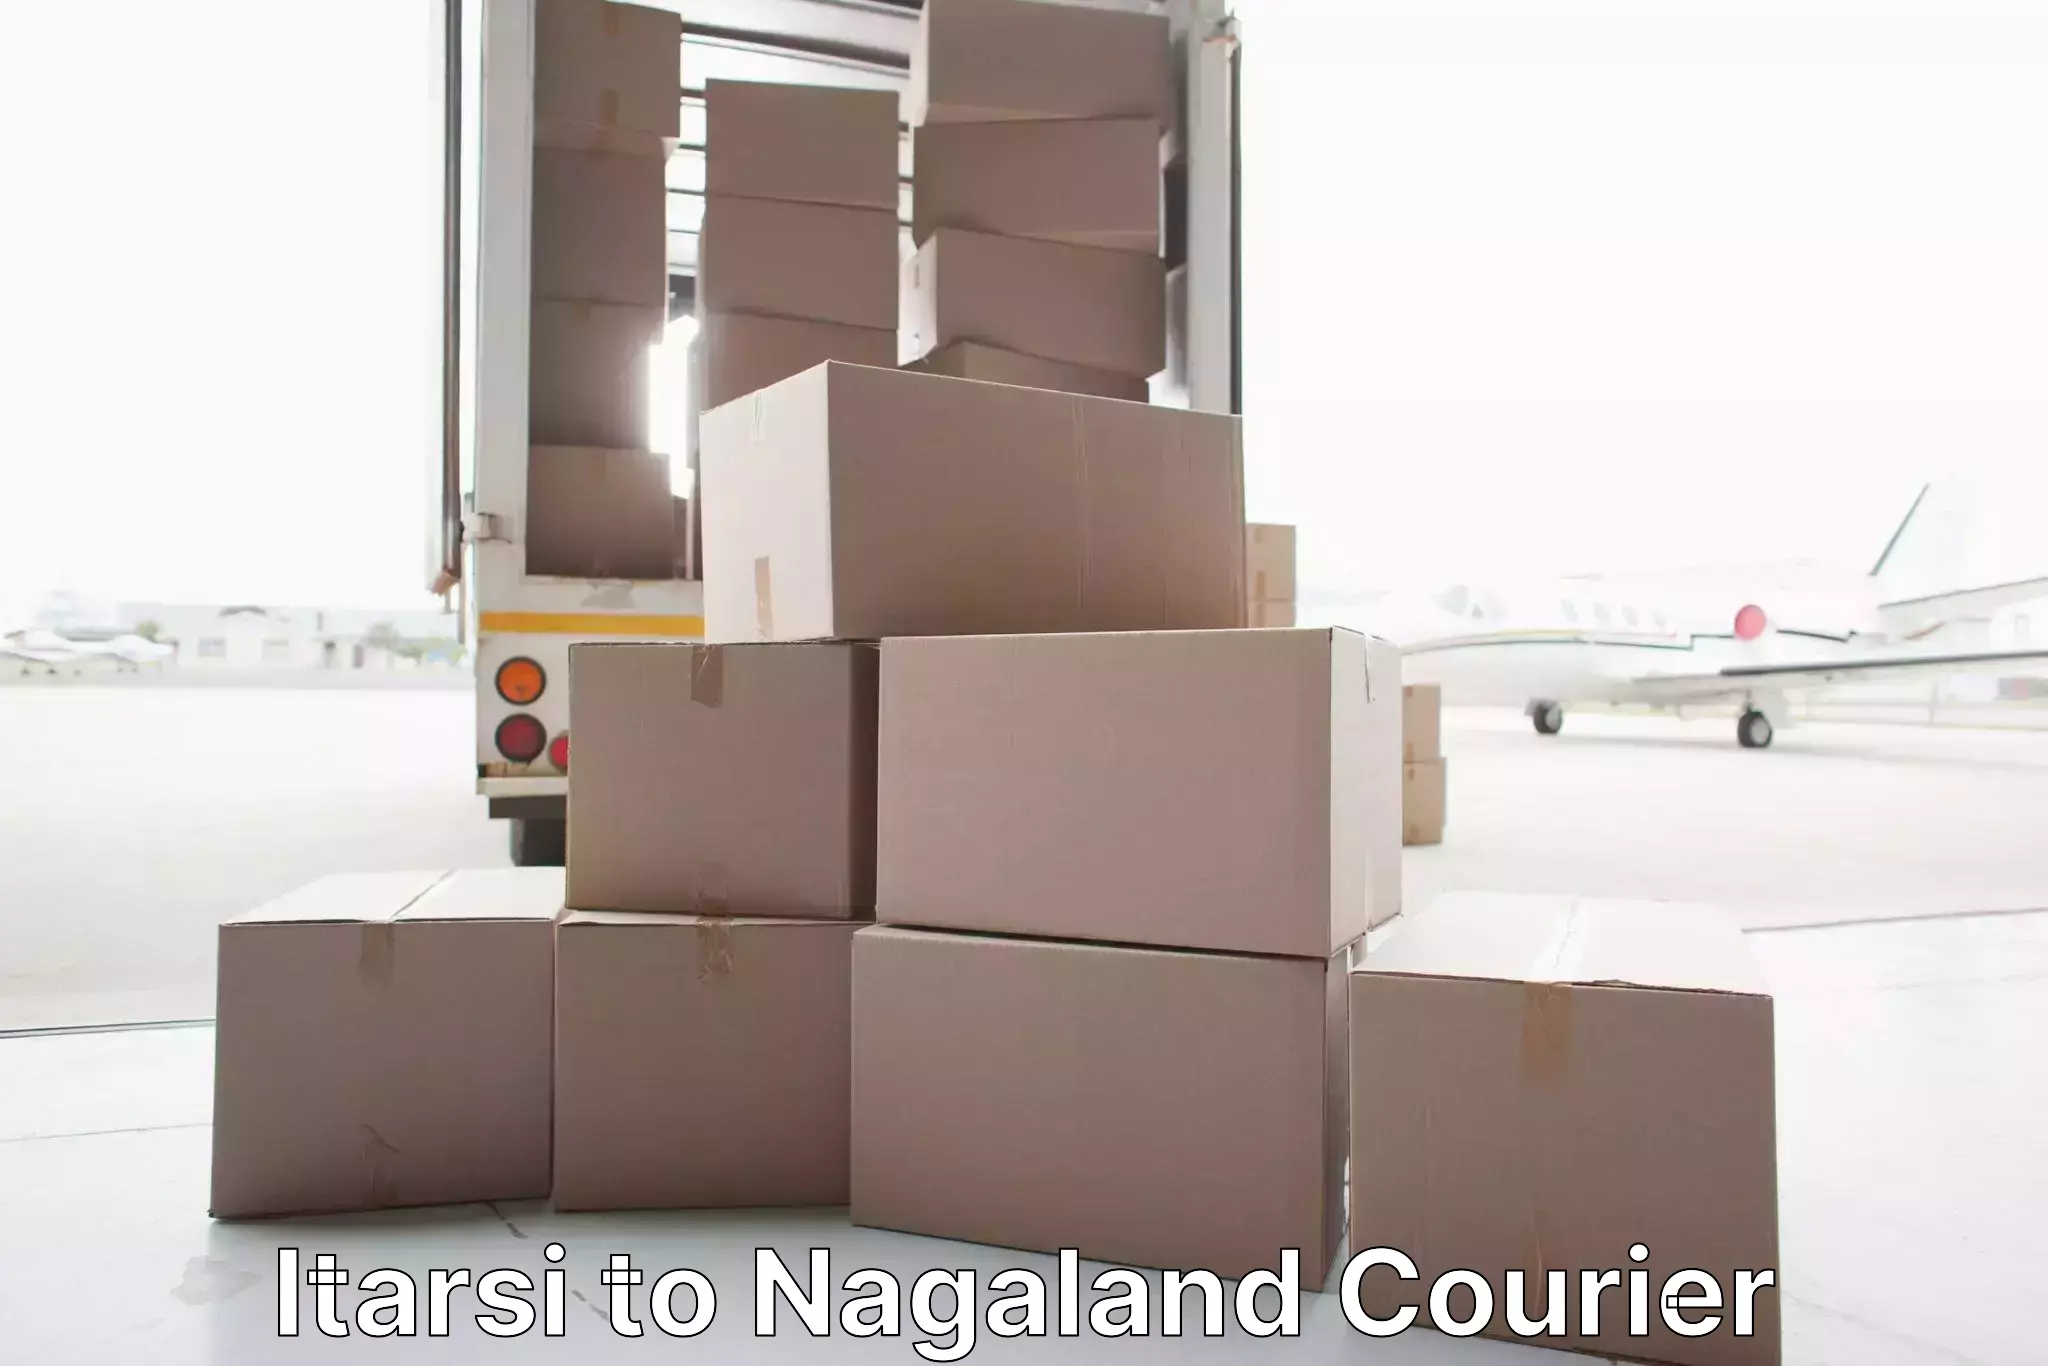 Reliable relocation services Itarsi to Nagaland